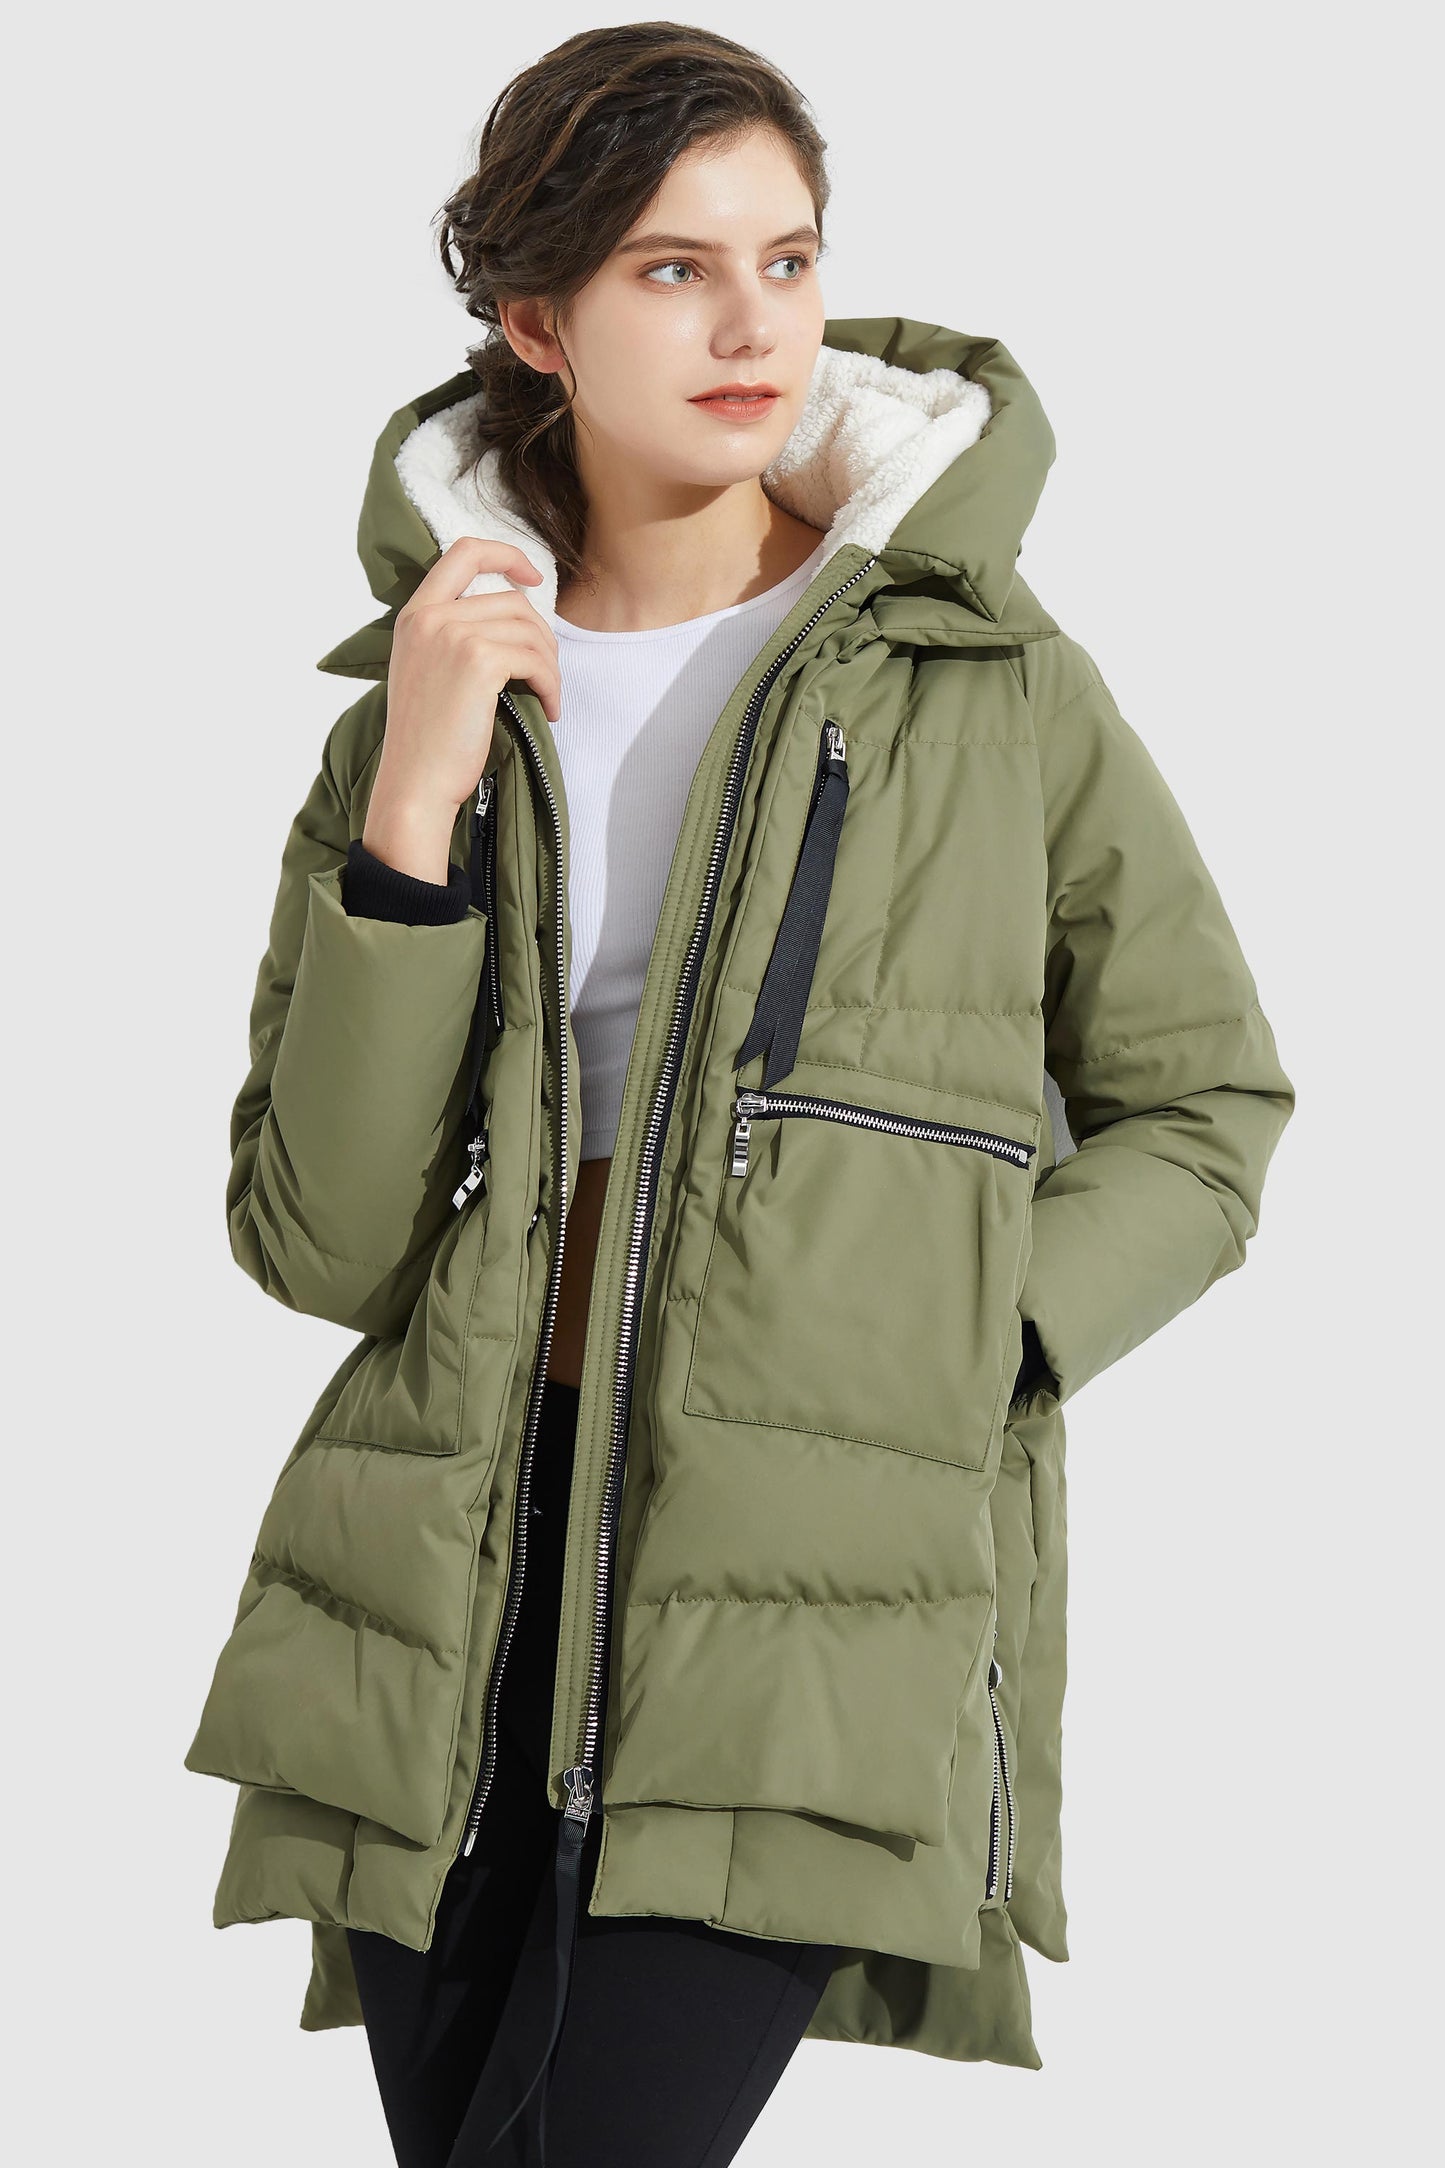 092 Universe Classics Women's Thickened Down Jacket